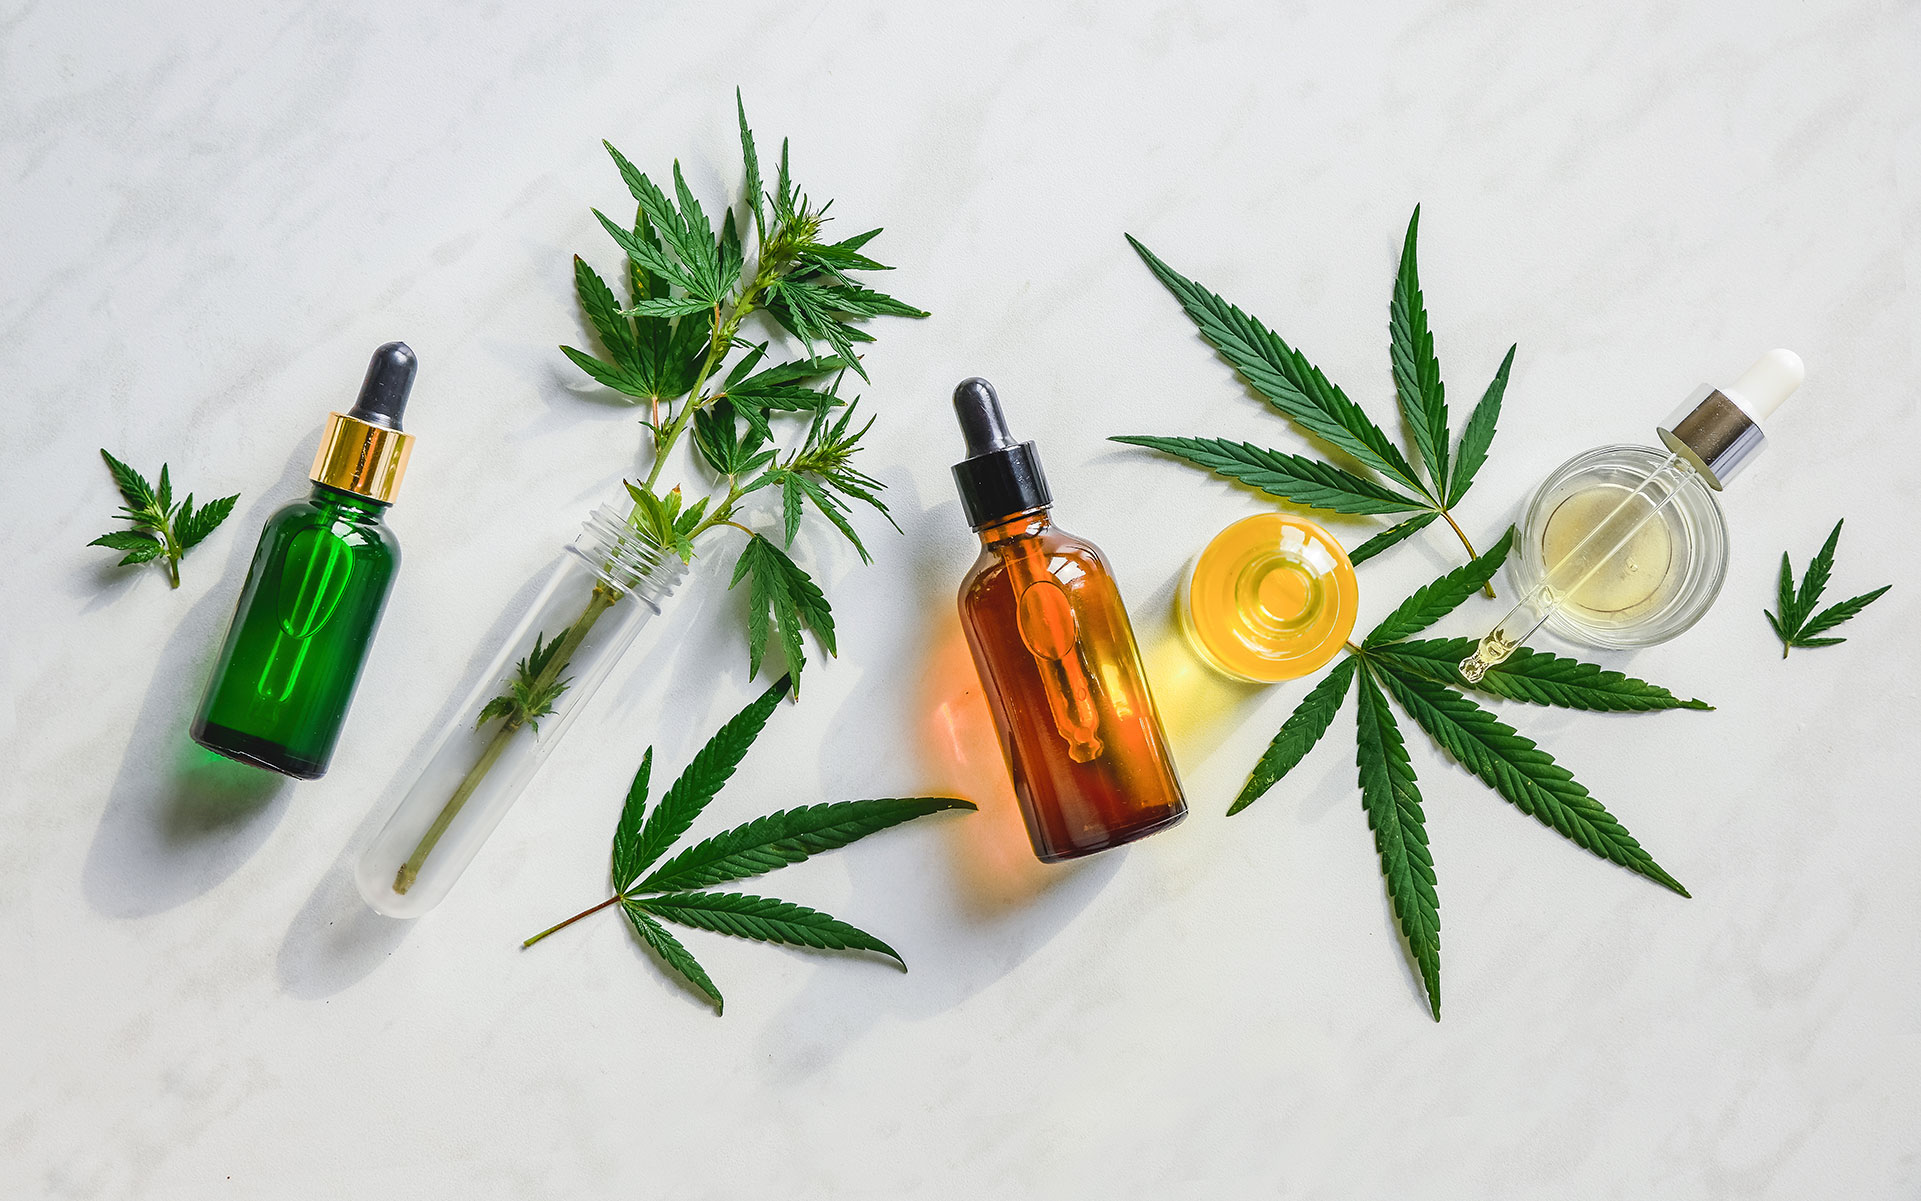 Where To Buy Fab Cbd Oil - Cbd|Oil|Cannabidiol|Products|View|Abstract|Effects|Hemp|Cannabis|Product|Thc|Pain|People|Health|Body|Plant|Cannabinoids|Medications|Oils|Drug|Benefits|System|Study|Marijuana|Anxiety|Side|Research|Effect|Liver|Quality|Treatment|Studies|Epilepsy|Symptoms|Gummies|Compounds|Dose|Time|Inflammation|Bottle|Cbd Oil|View Abstract|Side Effects|Cbd Products|Endocannabinoid System|Multiple Sclerosis|Cbd Oils|Cbd Gummies|Cannabis Plant|Hemp Oil|Cbd Product|Hemp Plant|United States|Cytochrome P450|Many People|Chronic Pain|Nuleaf Naturals|Royal Cbd|Full-Spectrum Cbd Oil|Drug Administration|Cbd Oil Products|Medical Marijuana|Drug Test|Heavy Metals|Clinical Trial|Clinical Trials|Cbd Oil Side|Rating Highlights|Wide Variety|Animal Studies